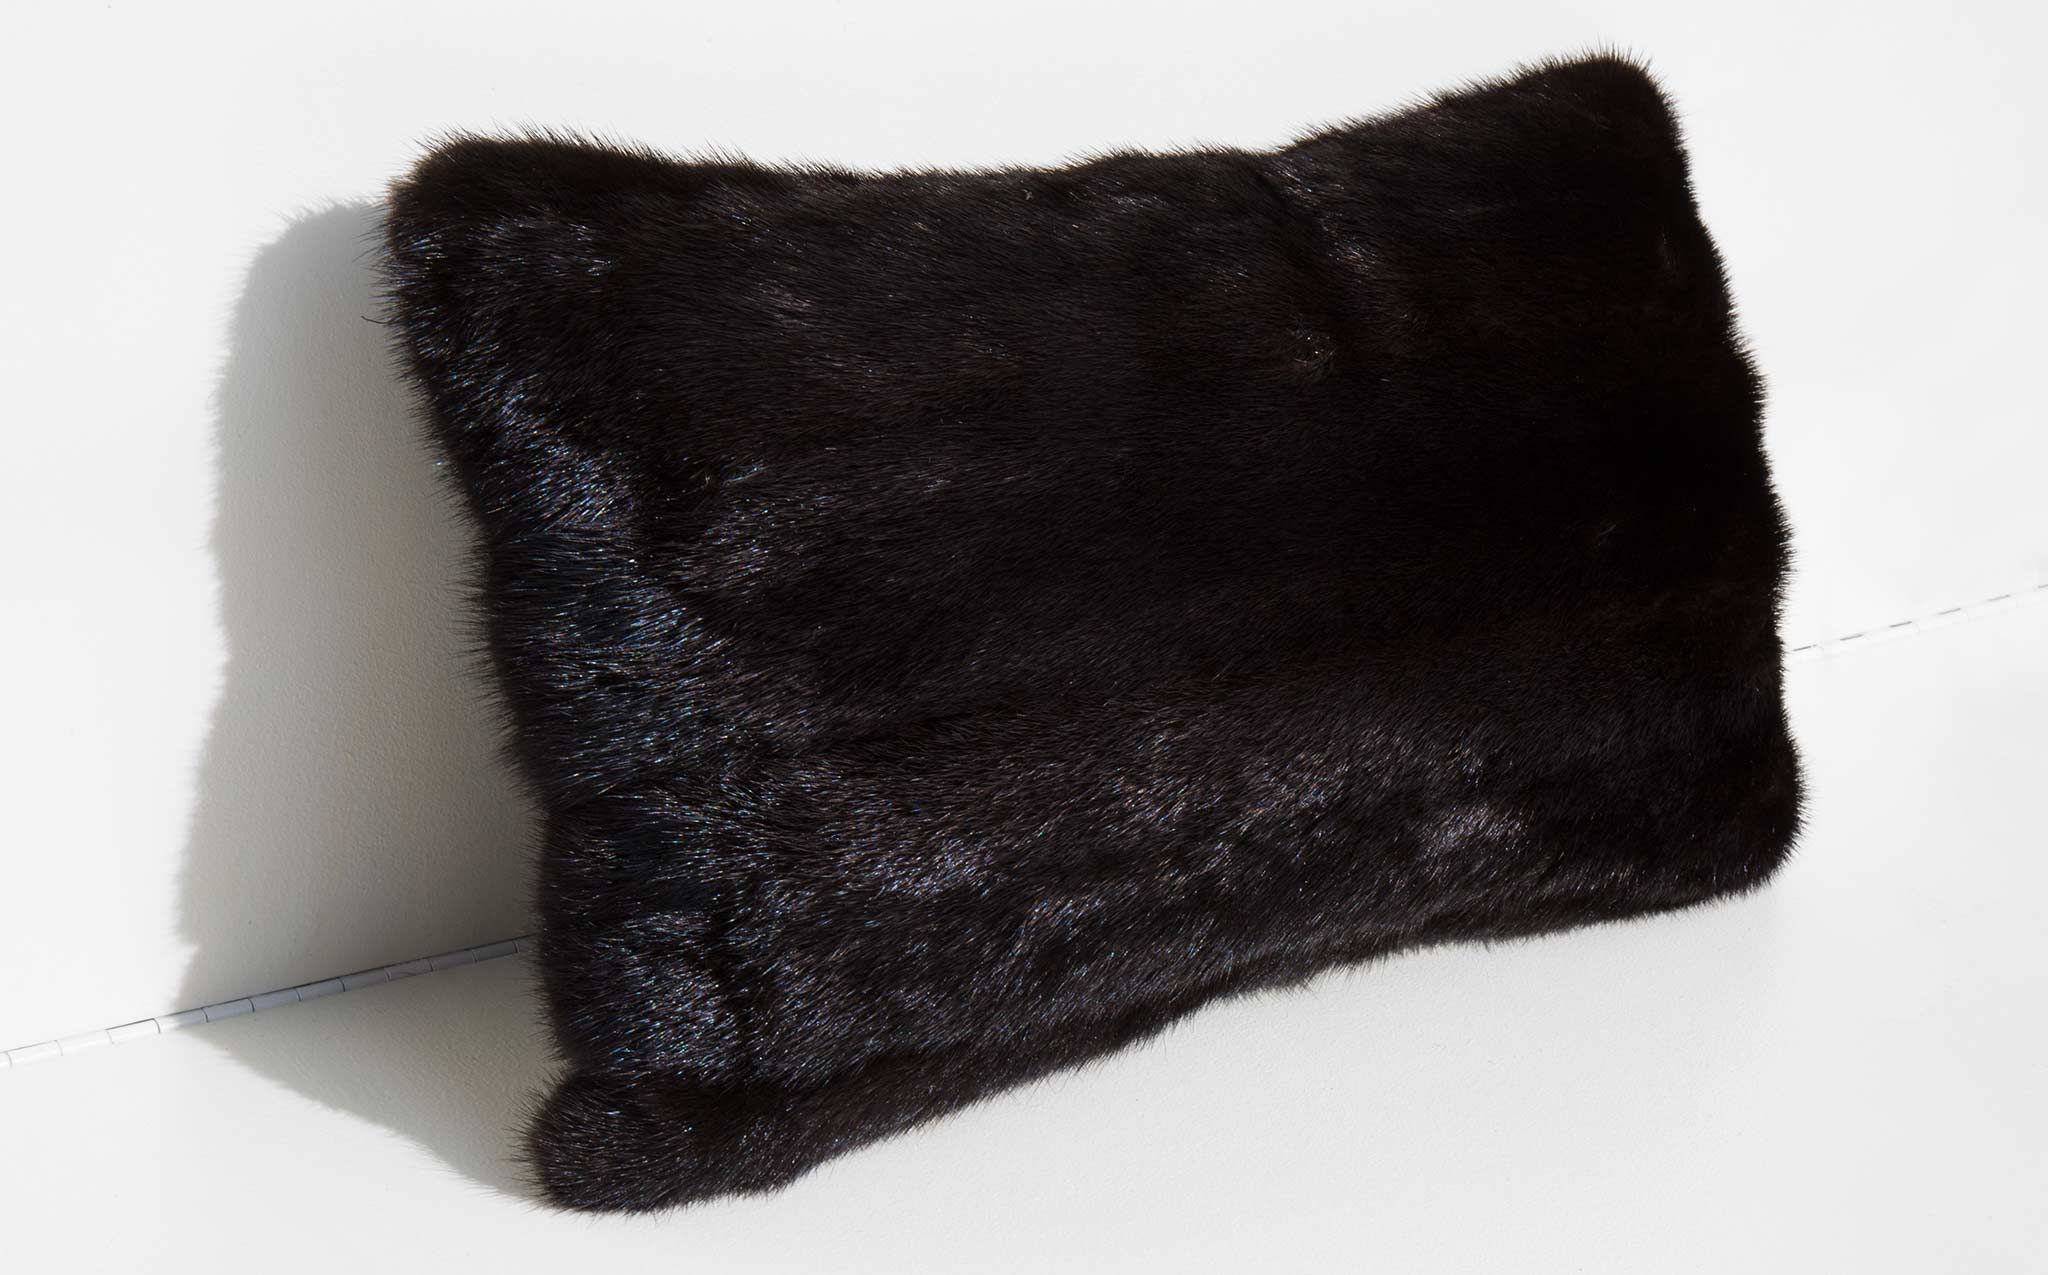 Recycled Mink and Velvet Throw Pillow